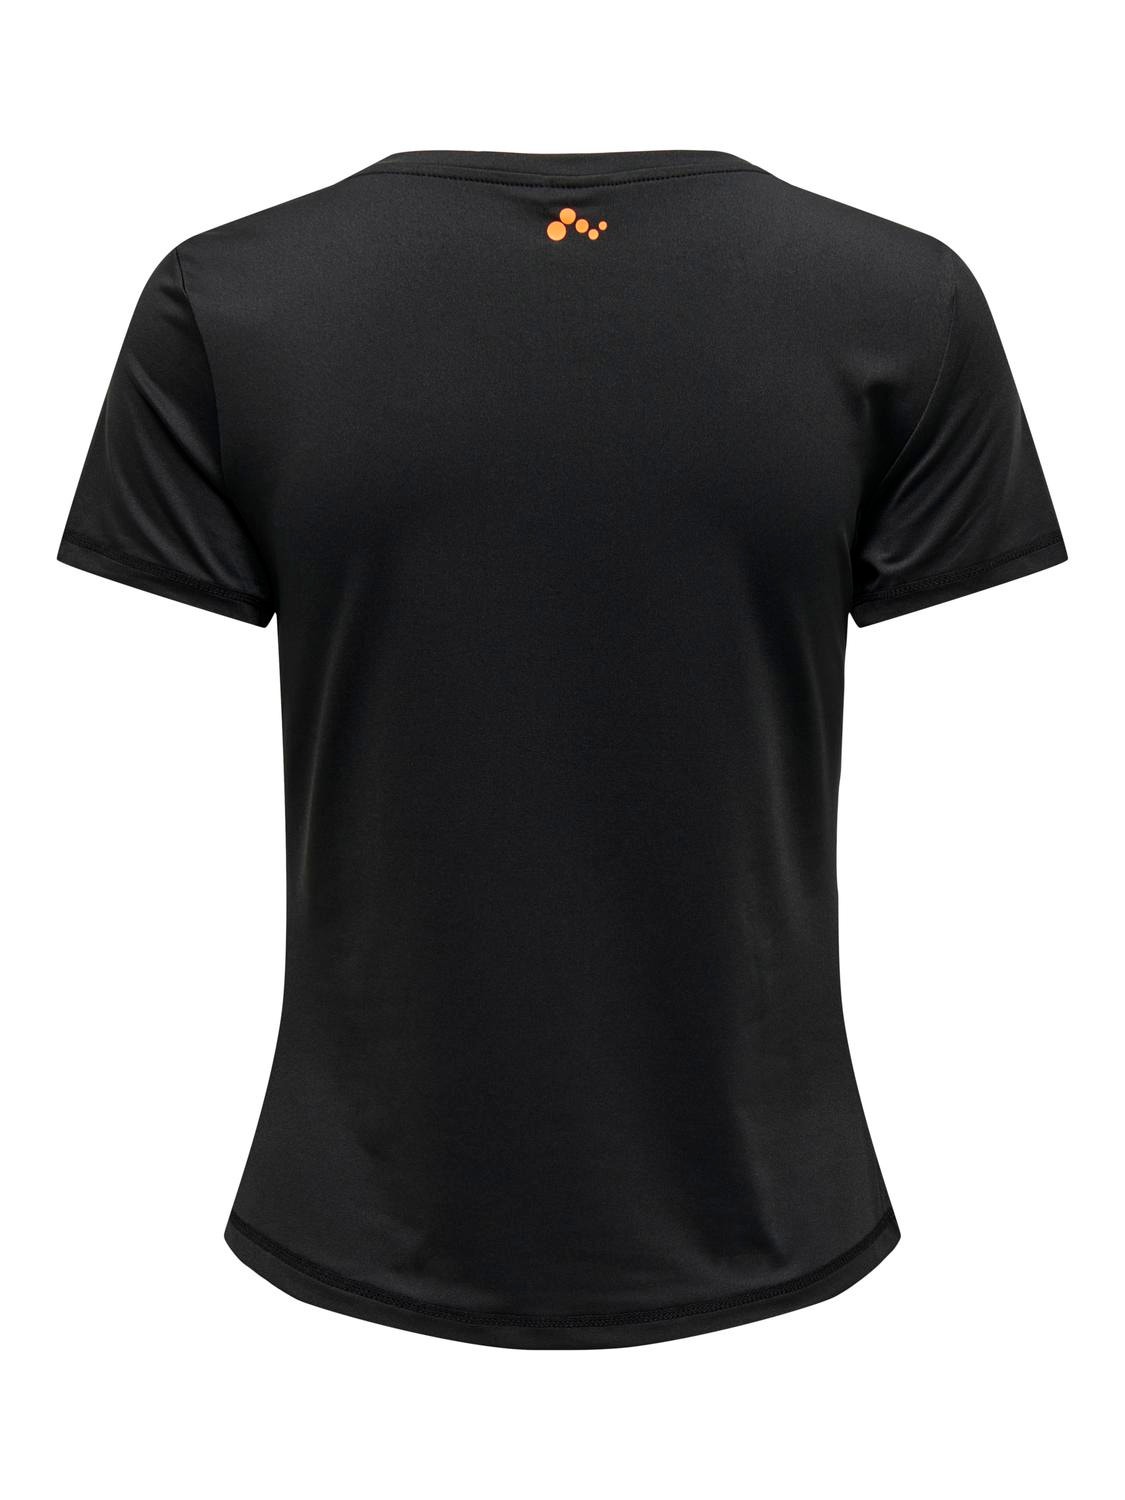 ONLY Training t-shirt with logo -Black - 15295208